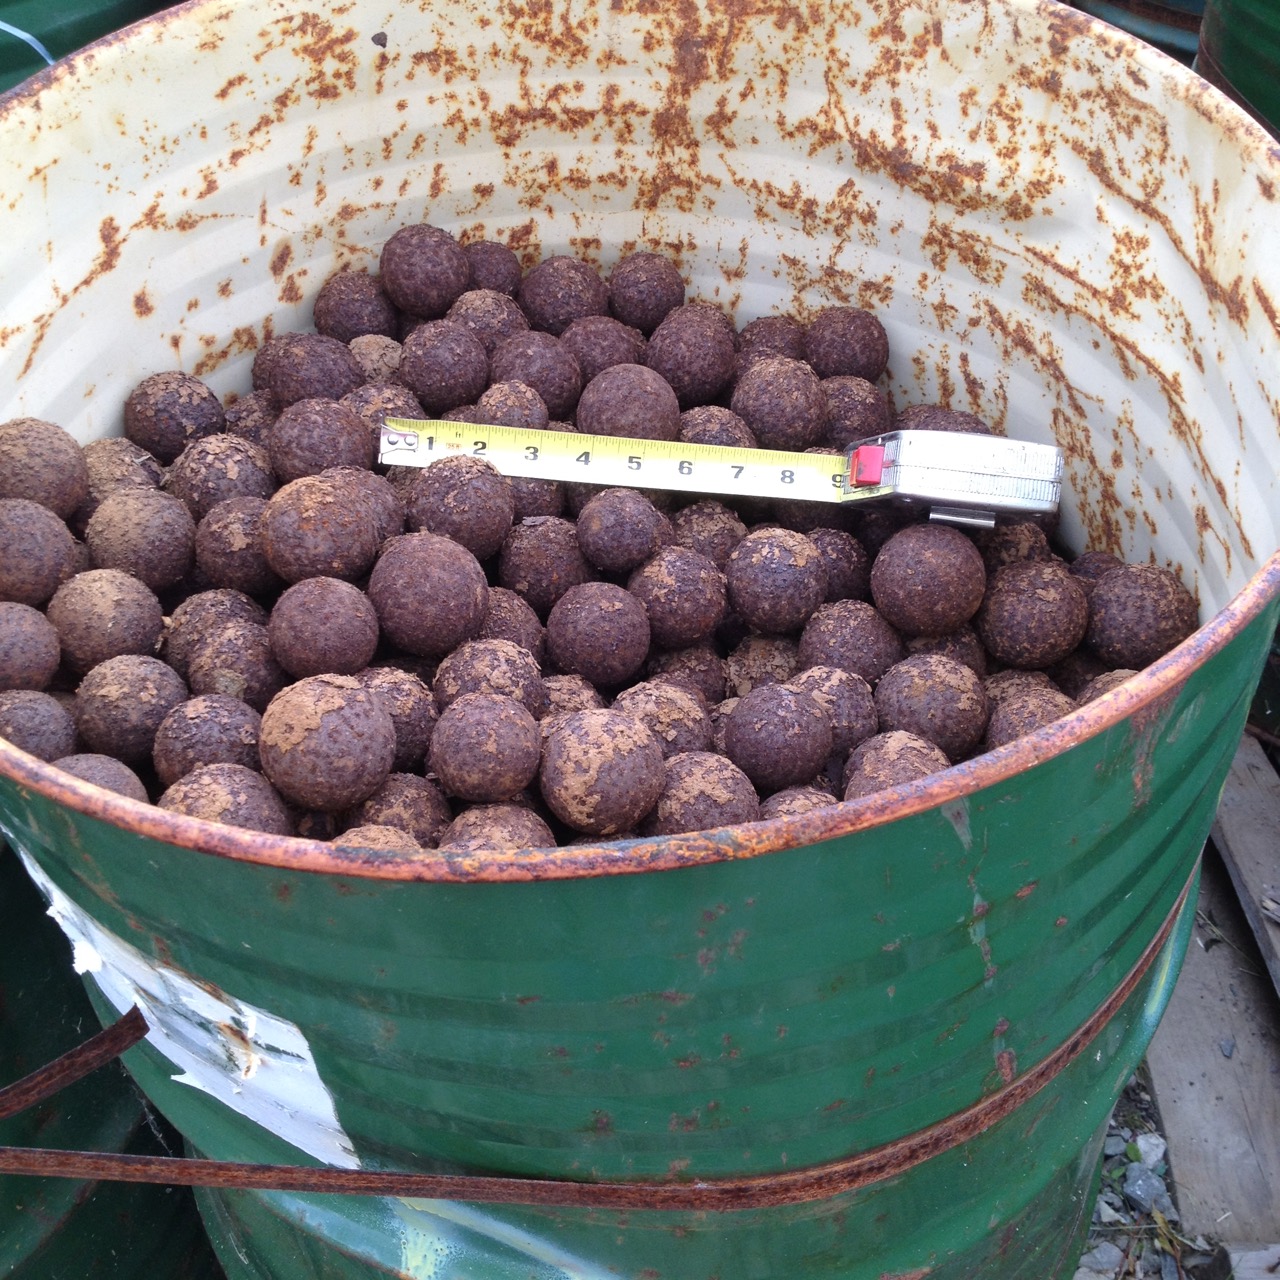 75 Units/Barrels - Used Grinding Balls, ranging in size from approximately 1" to 4" (Note: A Barrel is approximately 1-Ton)